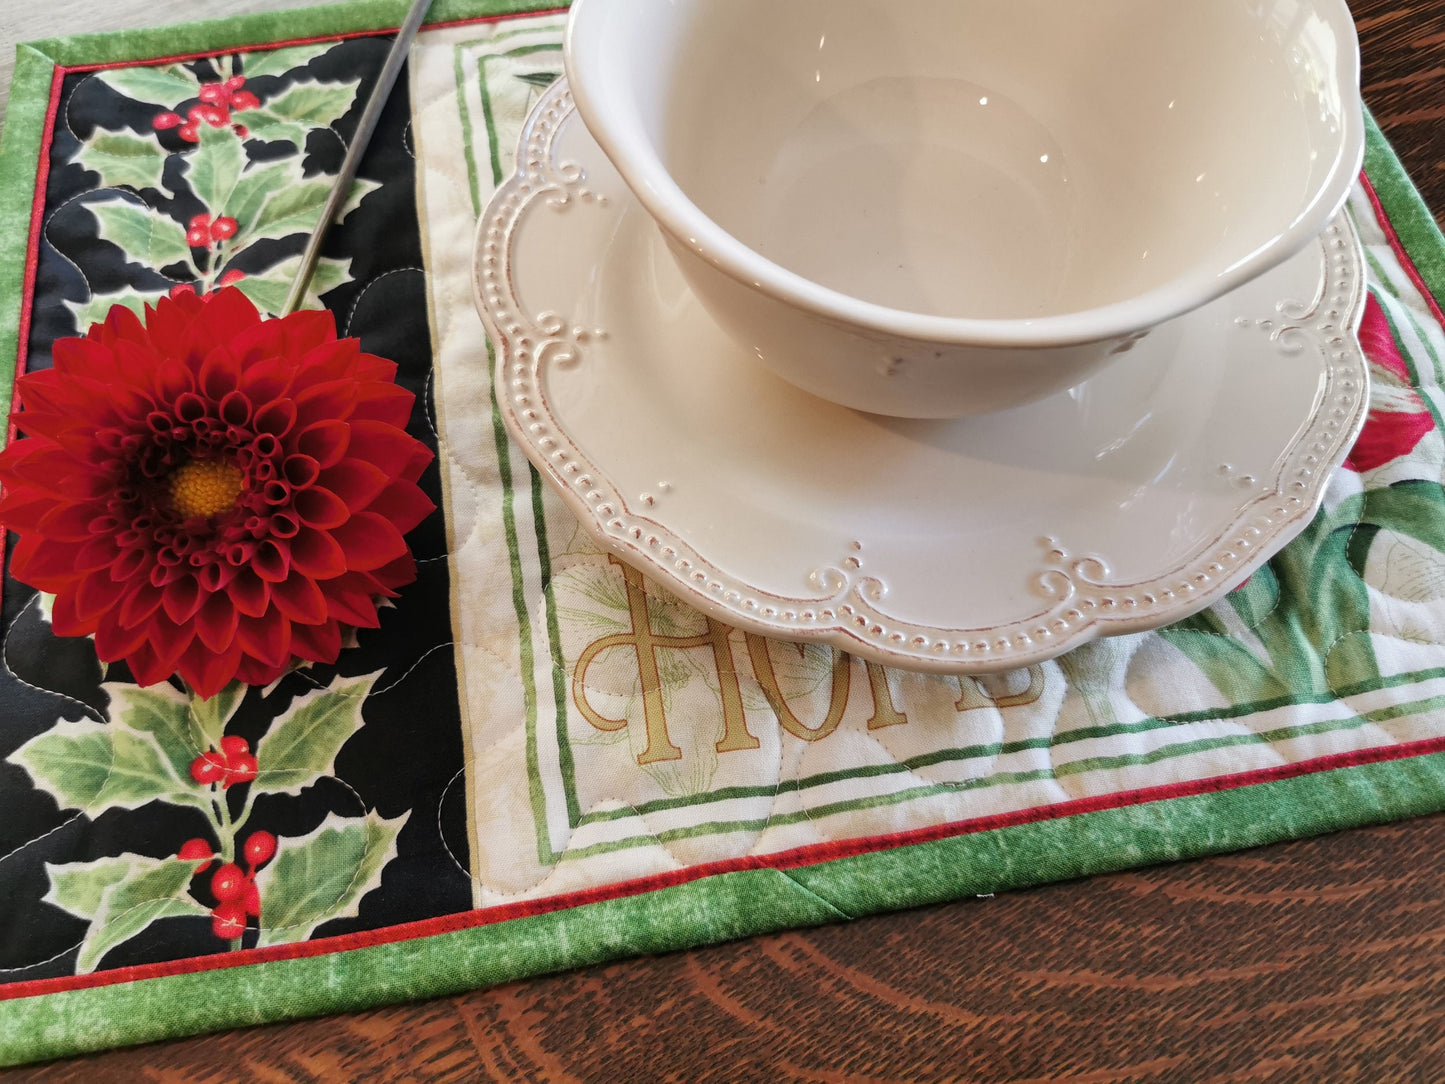 Quilted Christmas Placemats with Holly, Flowers, Chickadee Birds, Set of Six Holiday Table Mats